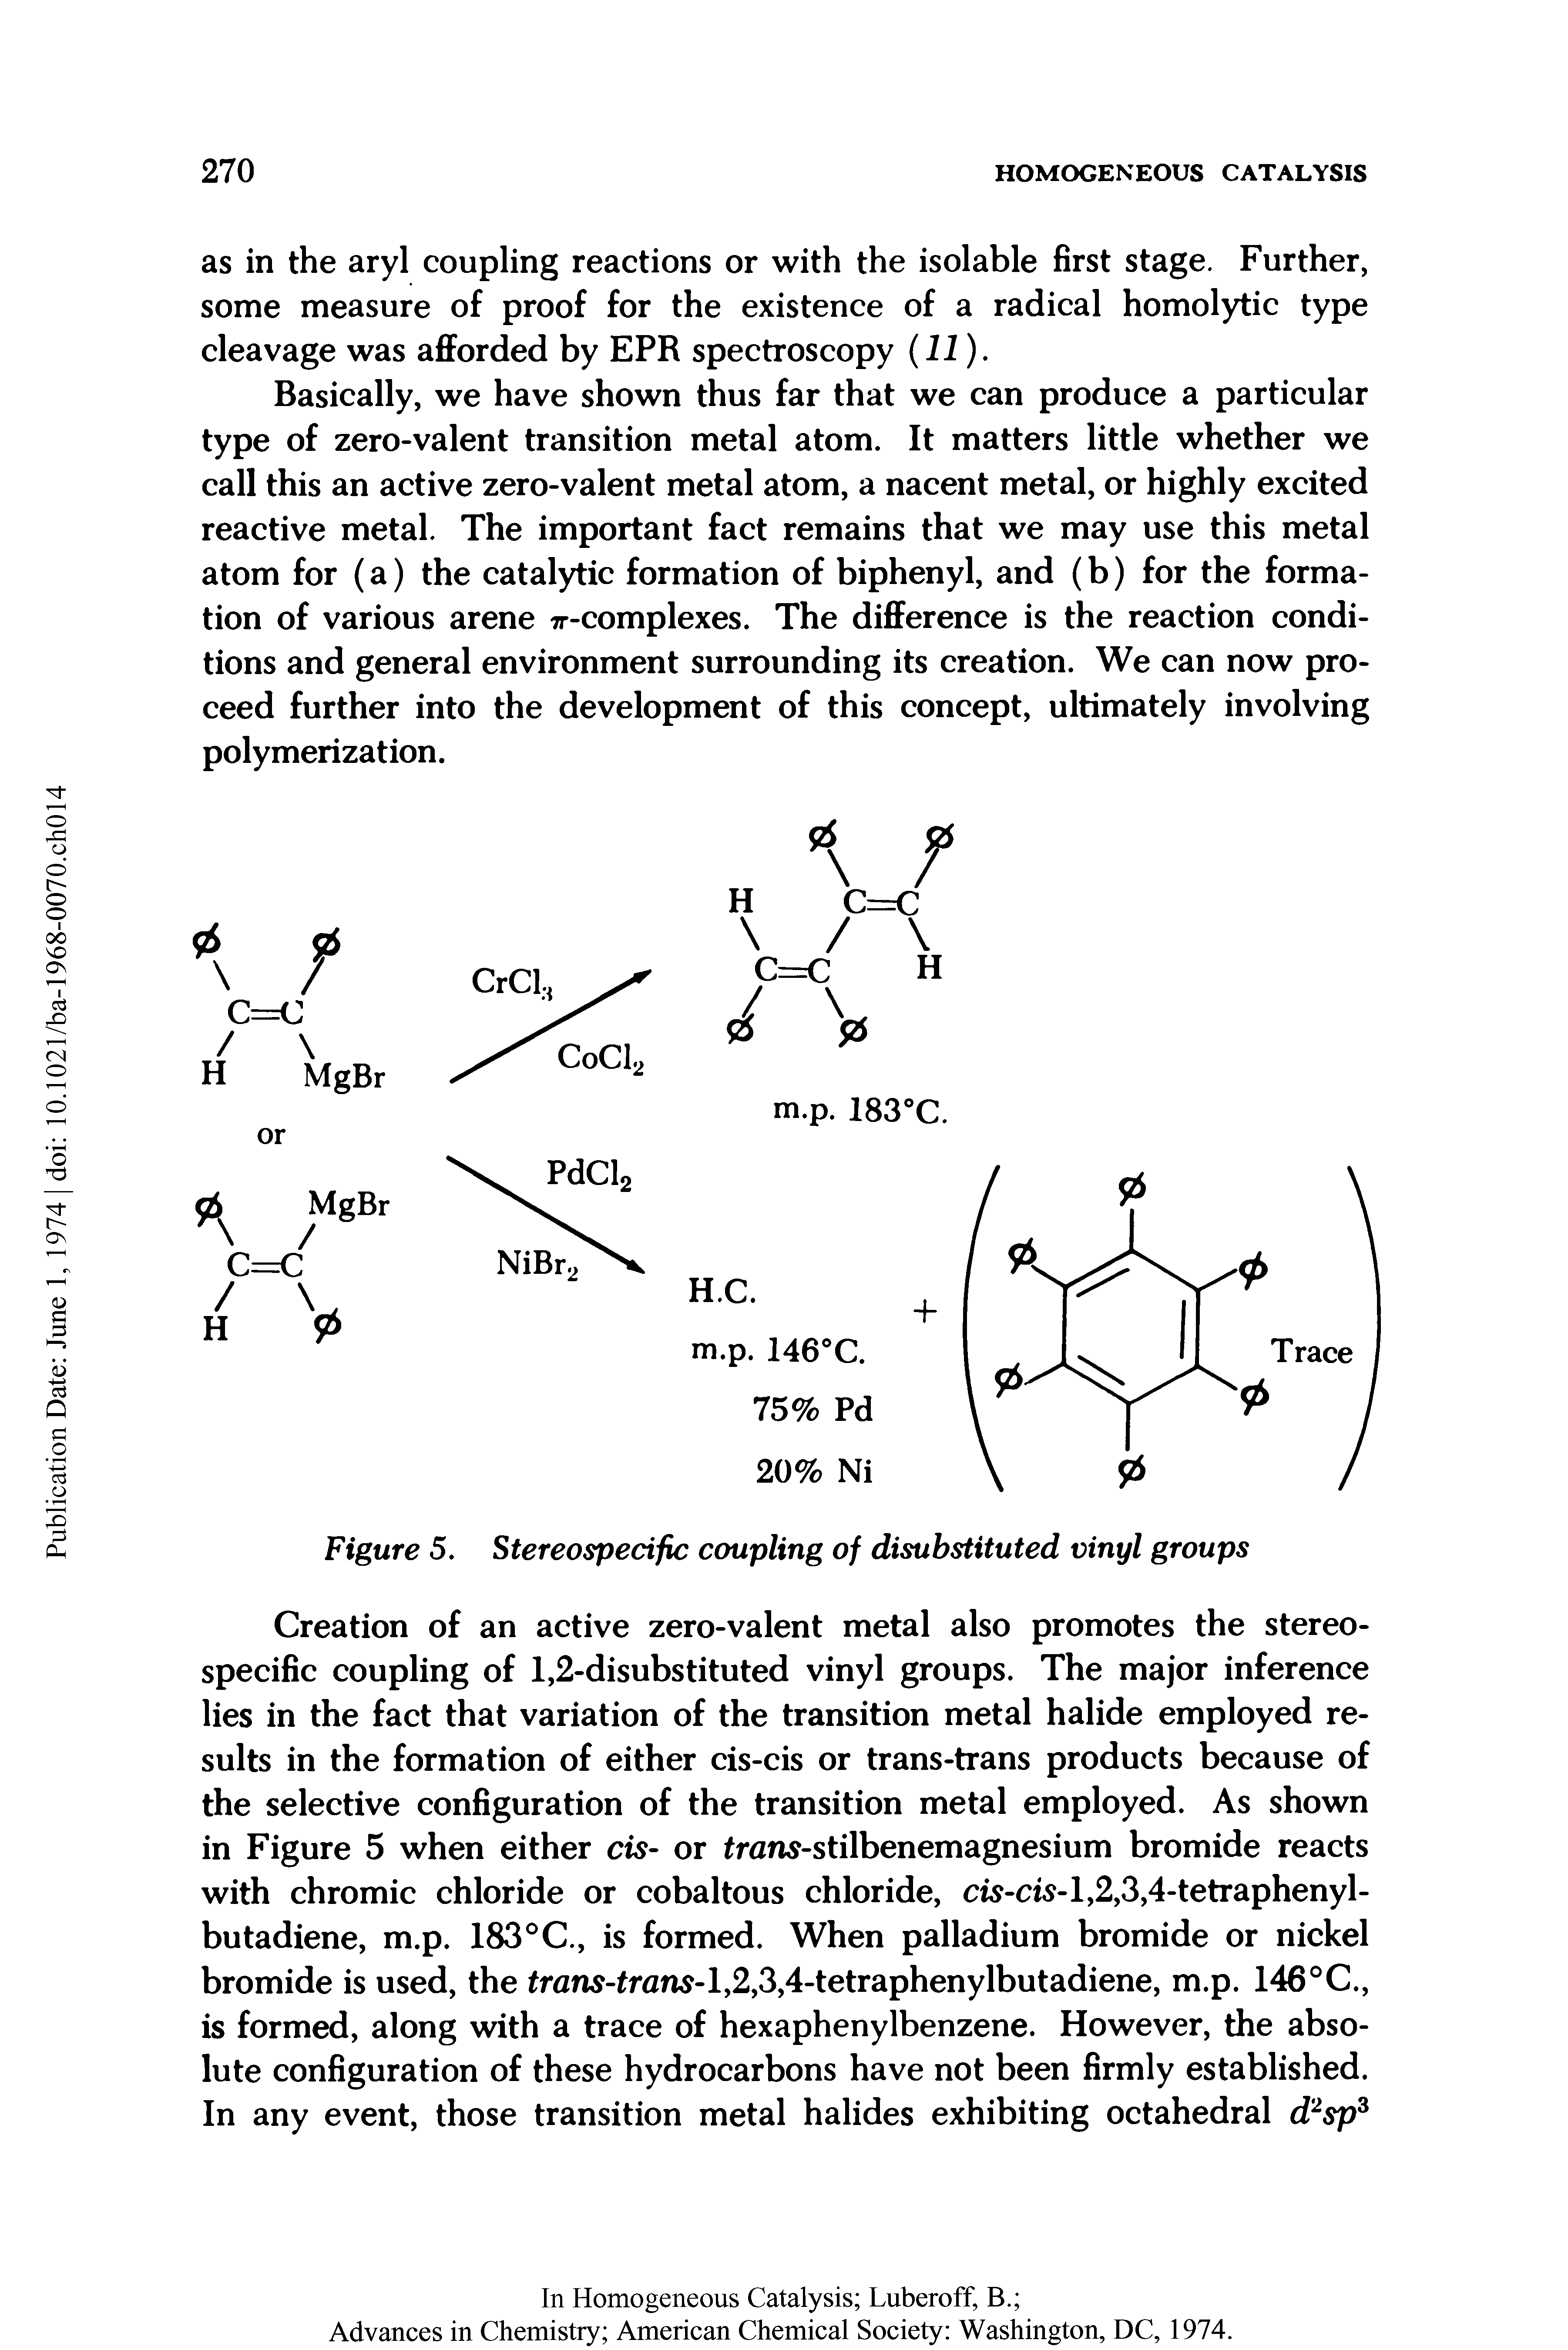 Figure 5. Stereospecific coupling of disubstituted vinyl groups...